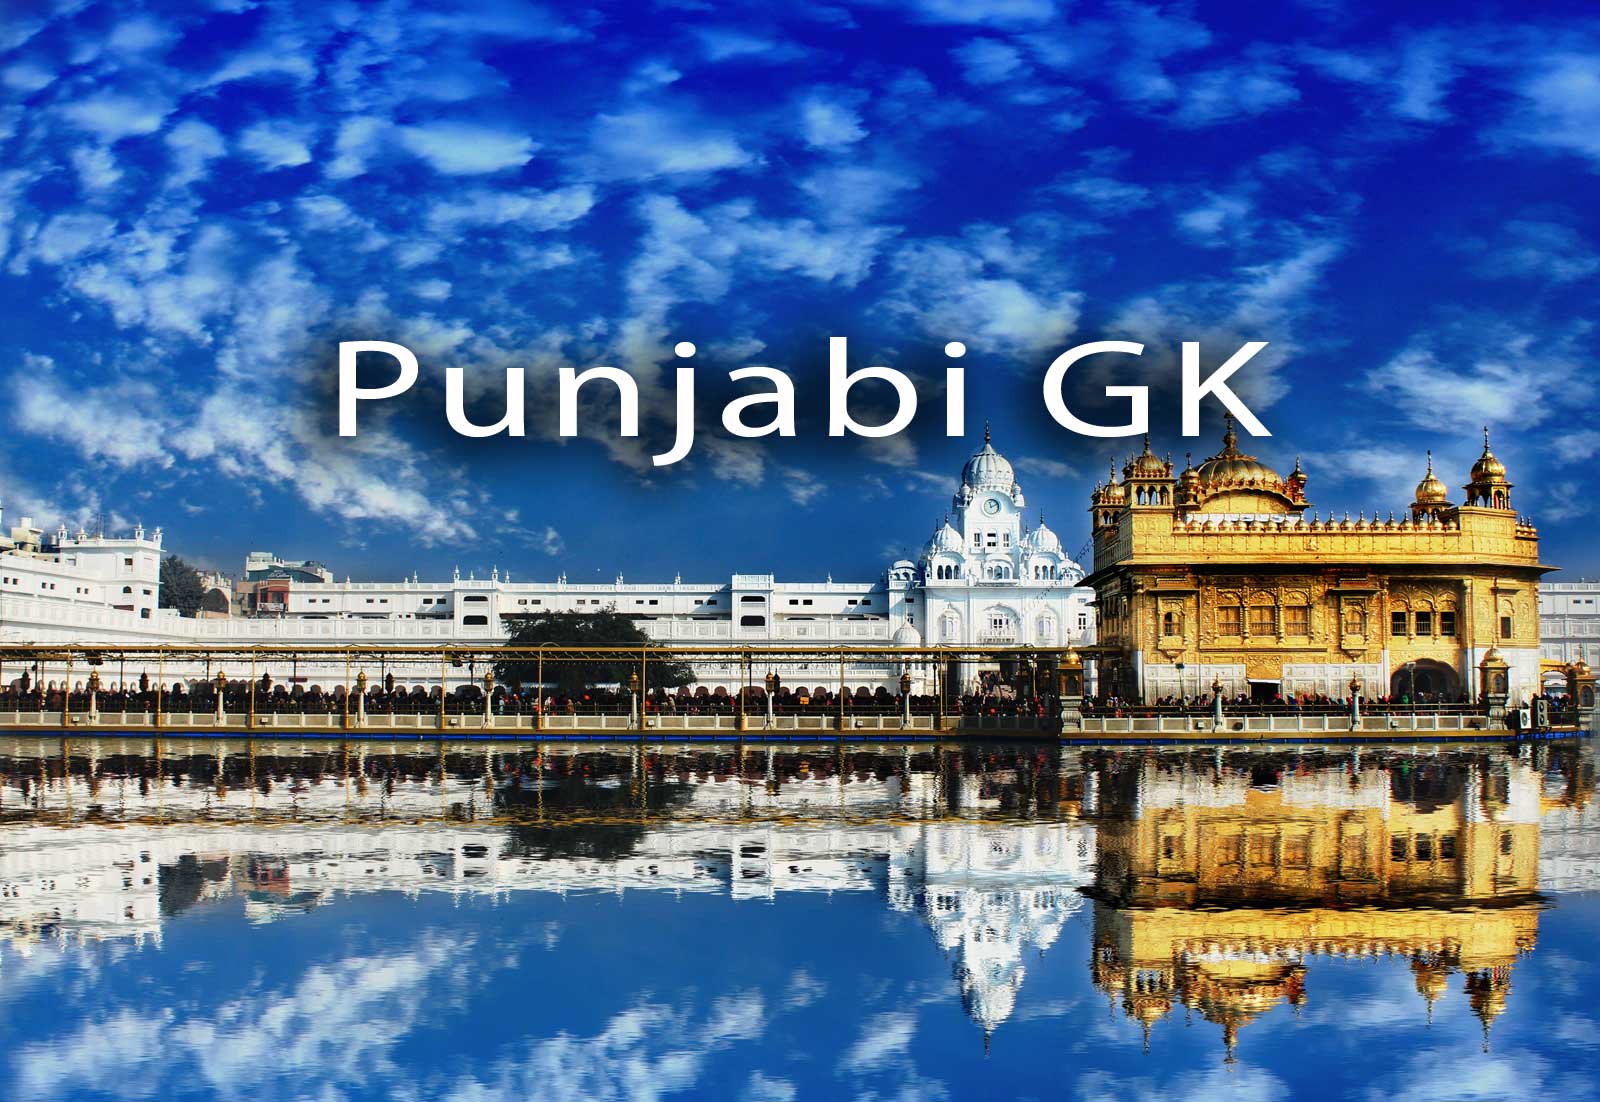 Punjabi GK MCQ Questions and Answers